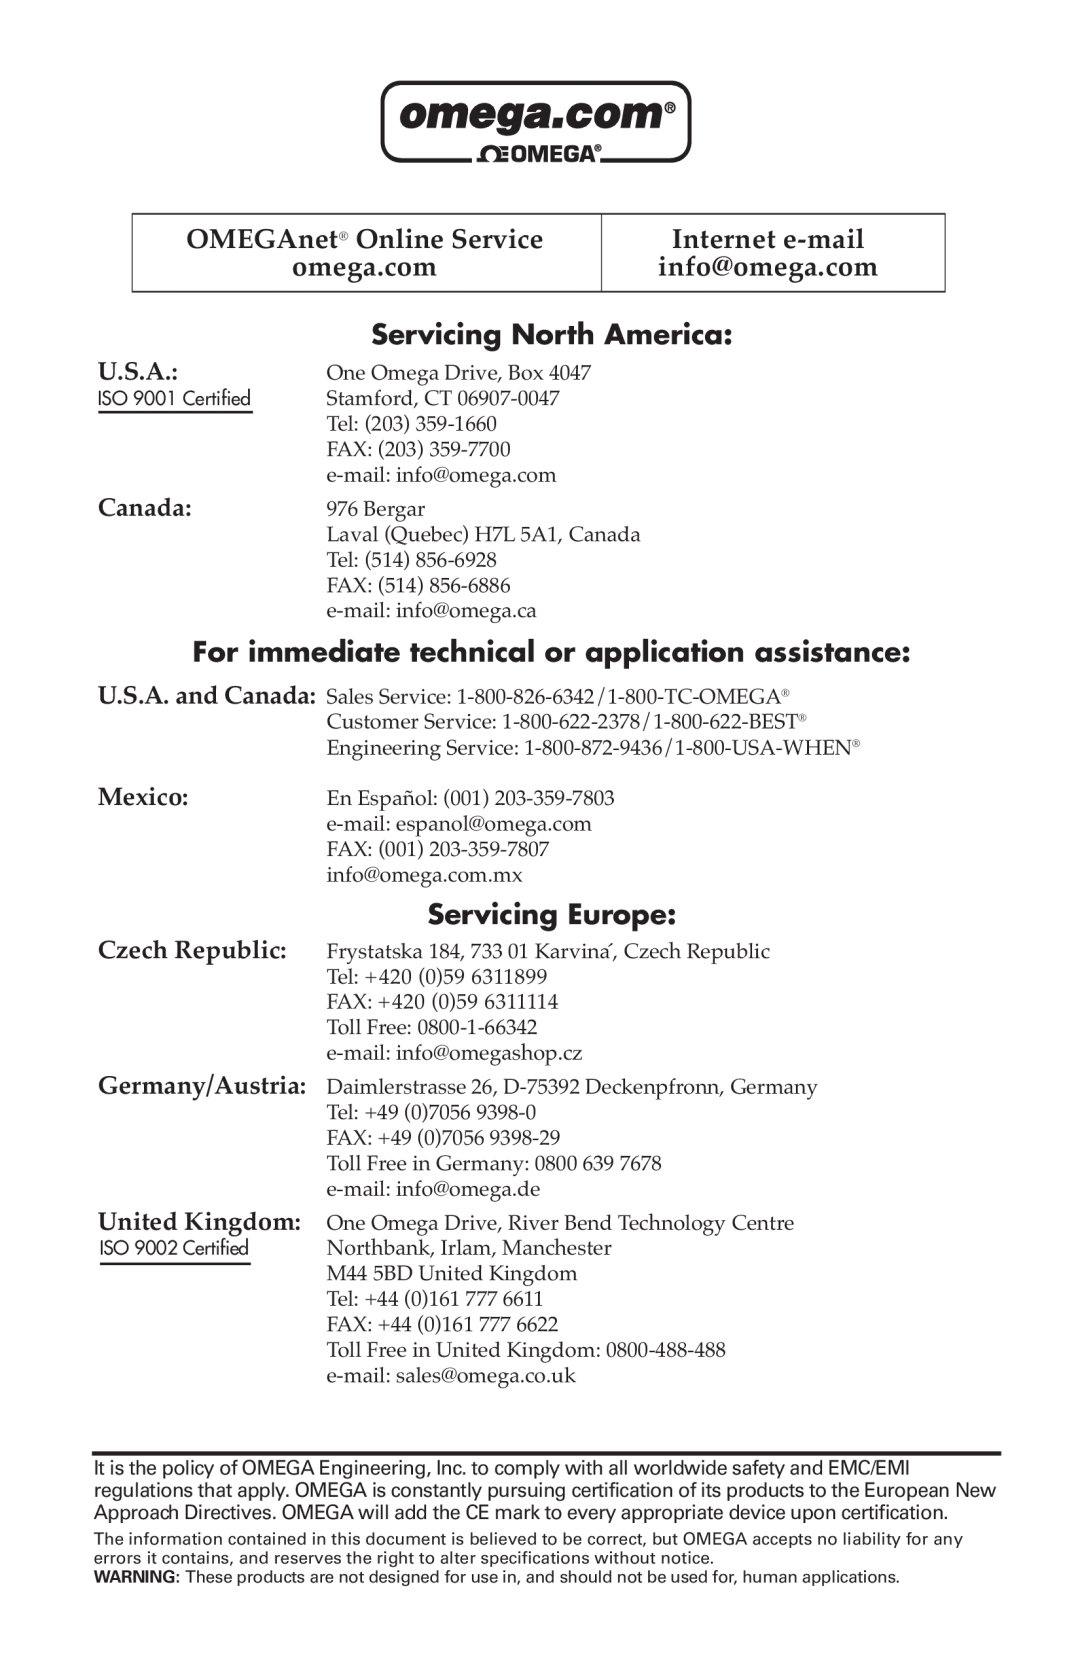 Omega Engineering CN 79000 Servicing North America, For immediate technical or application assistance, Servicing Europe 